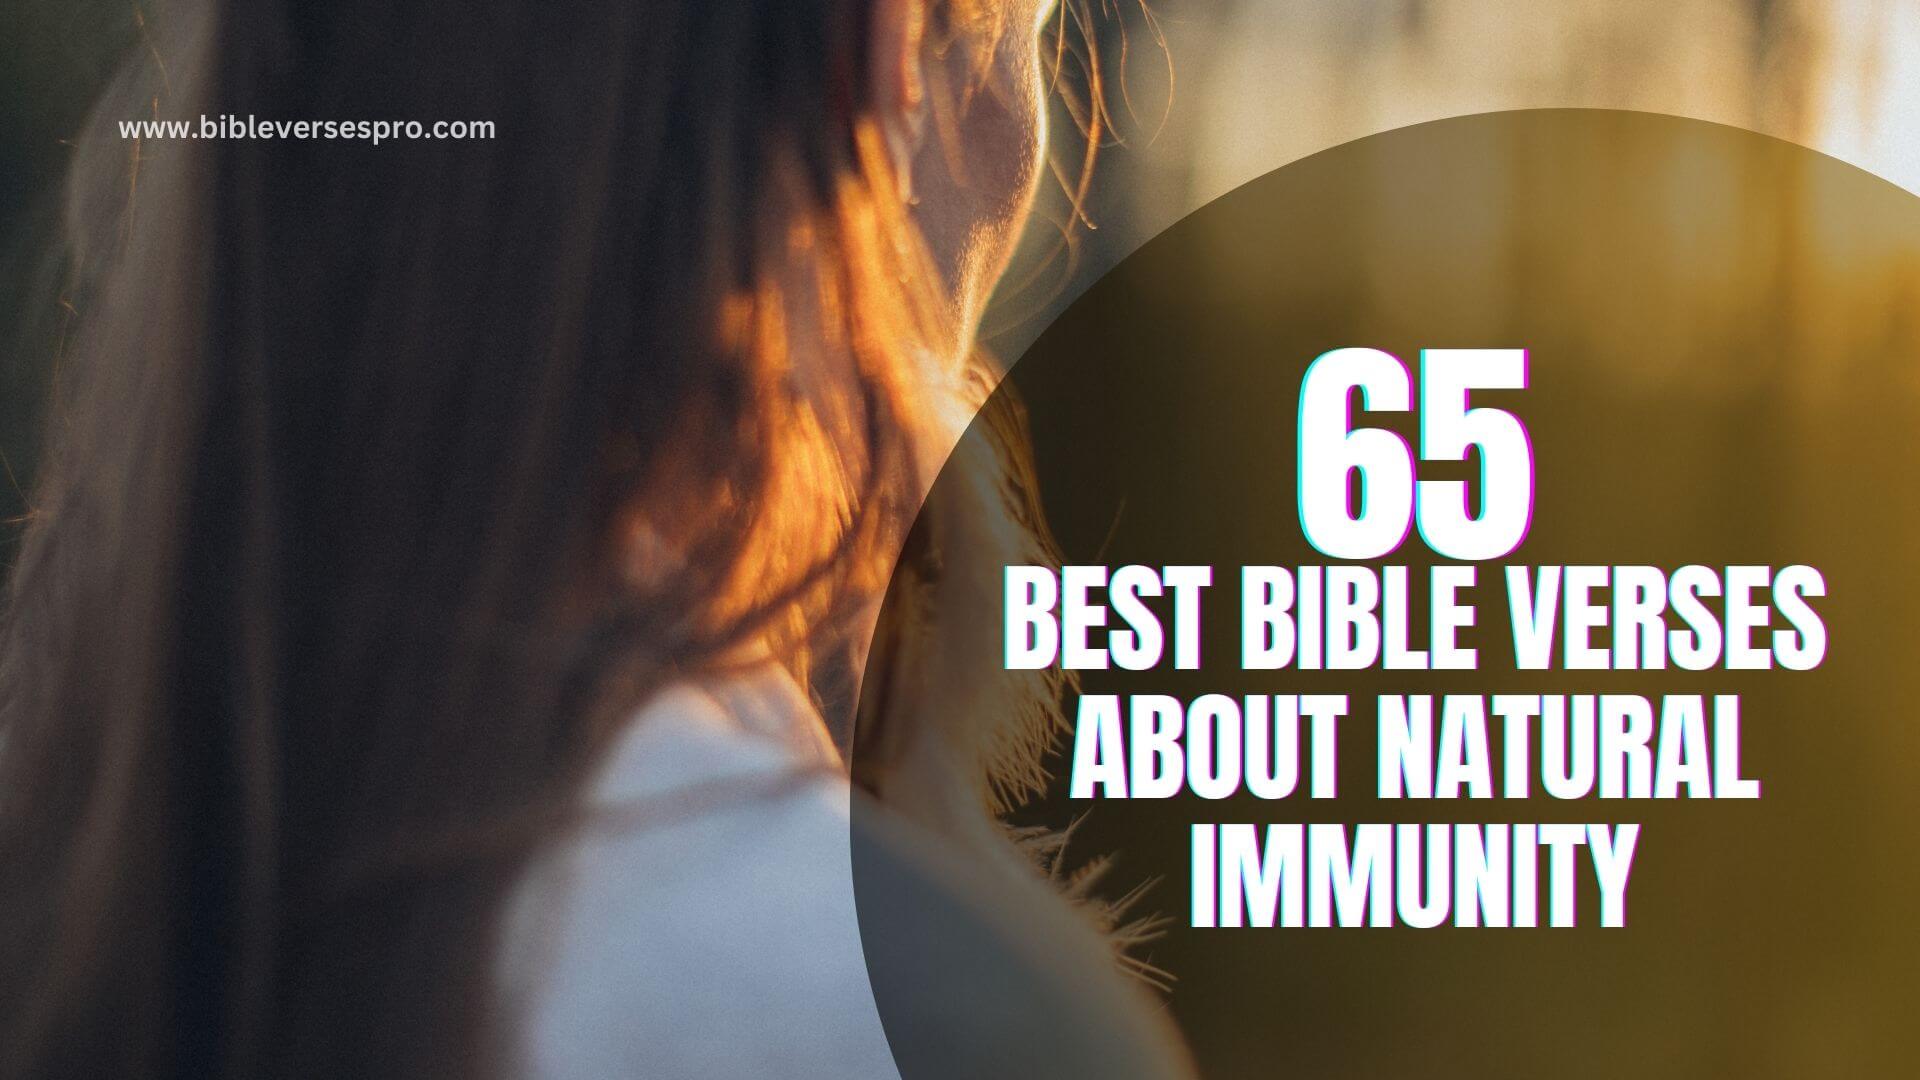 BEST BIBLE VERSES ABOUT NATURAL IMMUNITY (1)